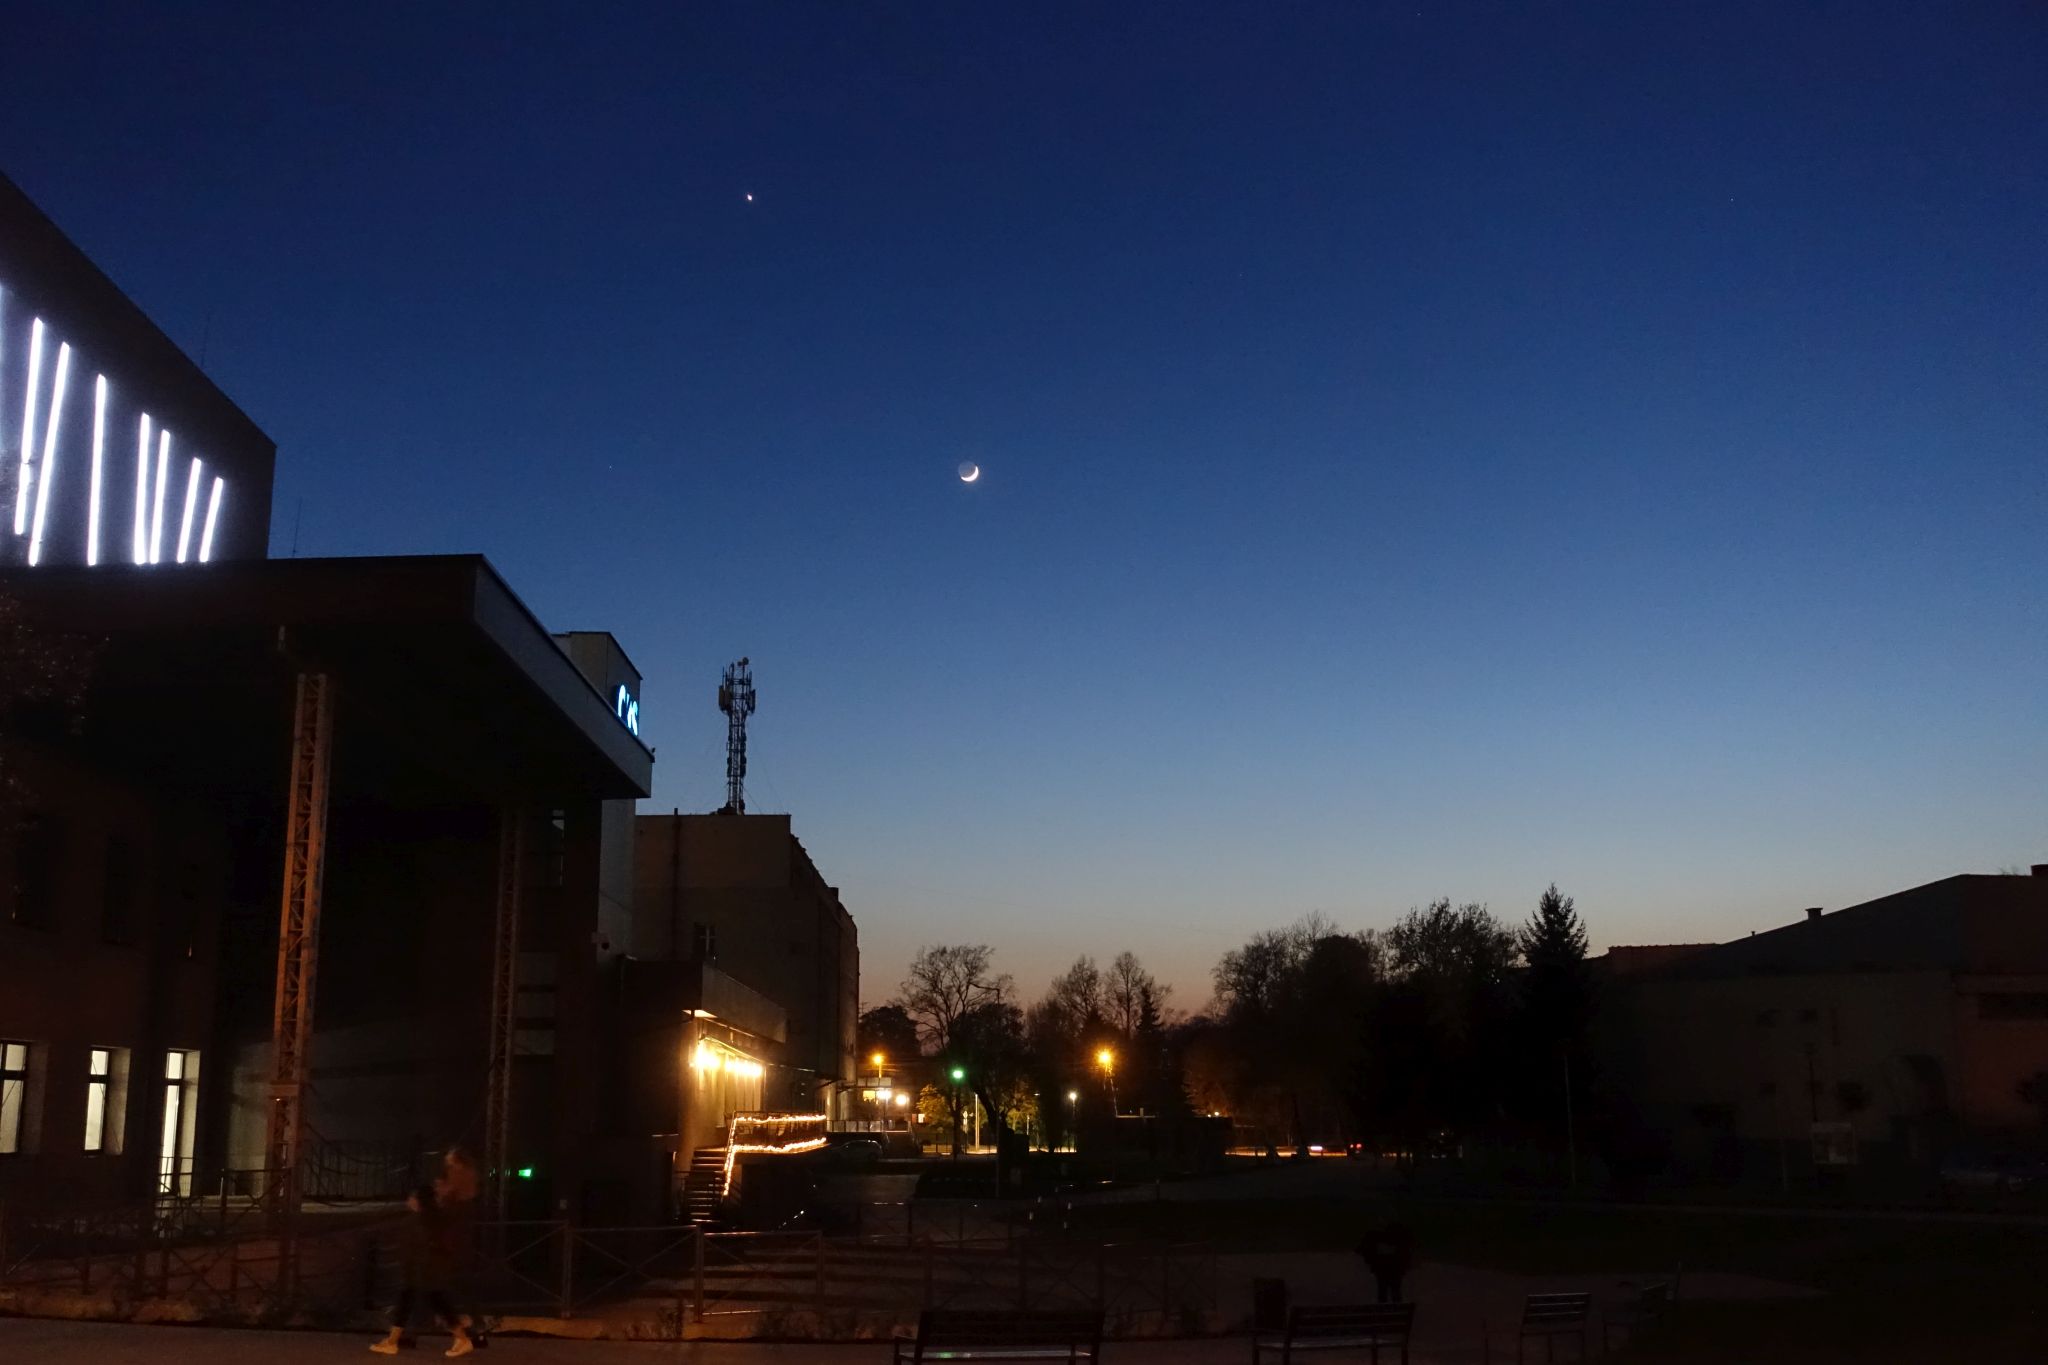 A sky just after sunset. Moon and Venus are clearly visible. Bottom and left part of the picture shows some buildings and trees.